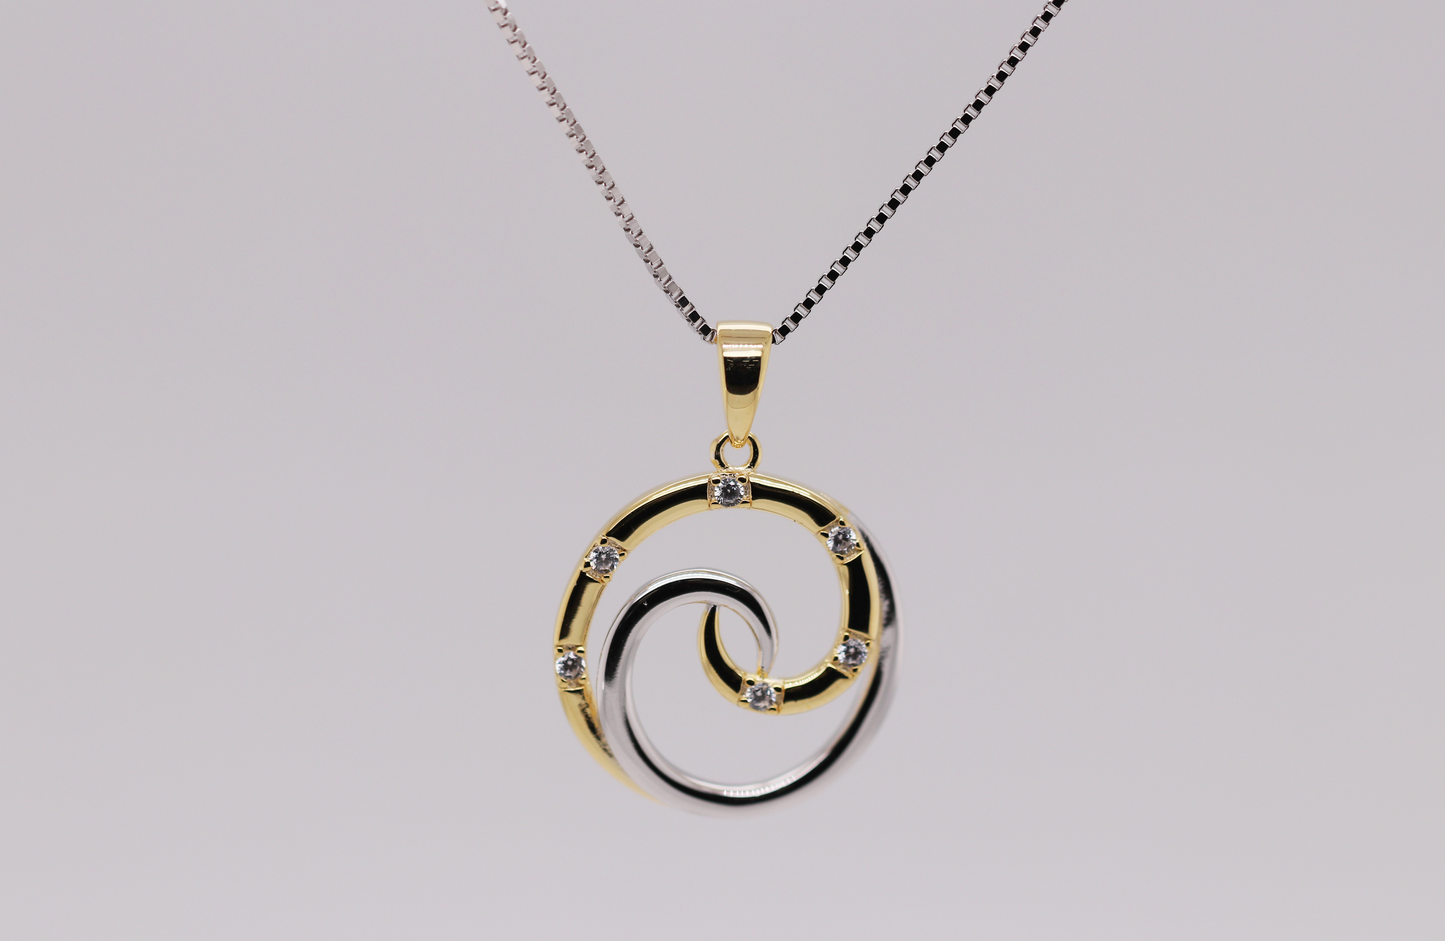 3 Tone Collection - Gold and Silver Necklace Ref: 3COLP007